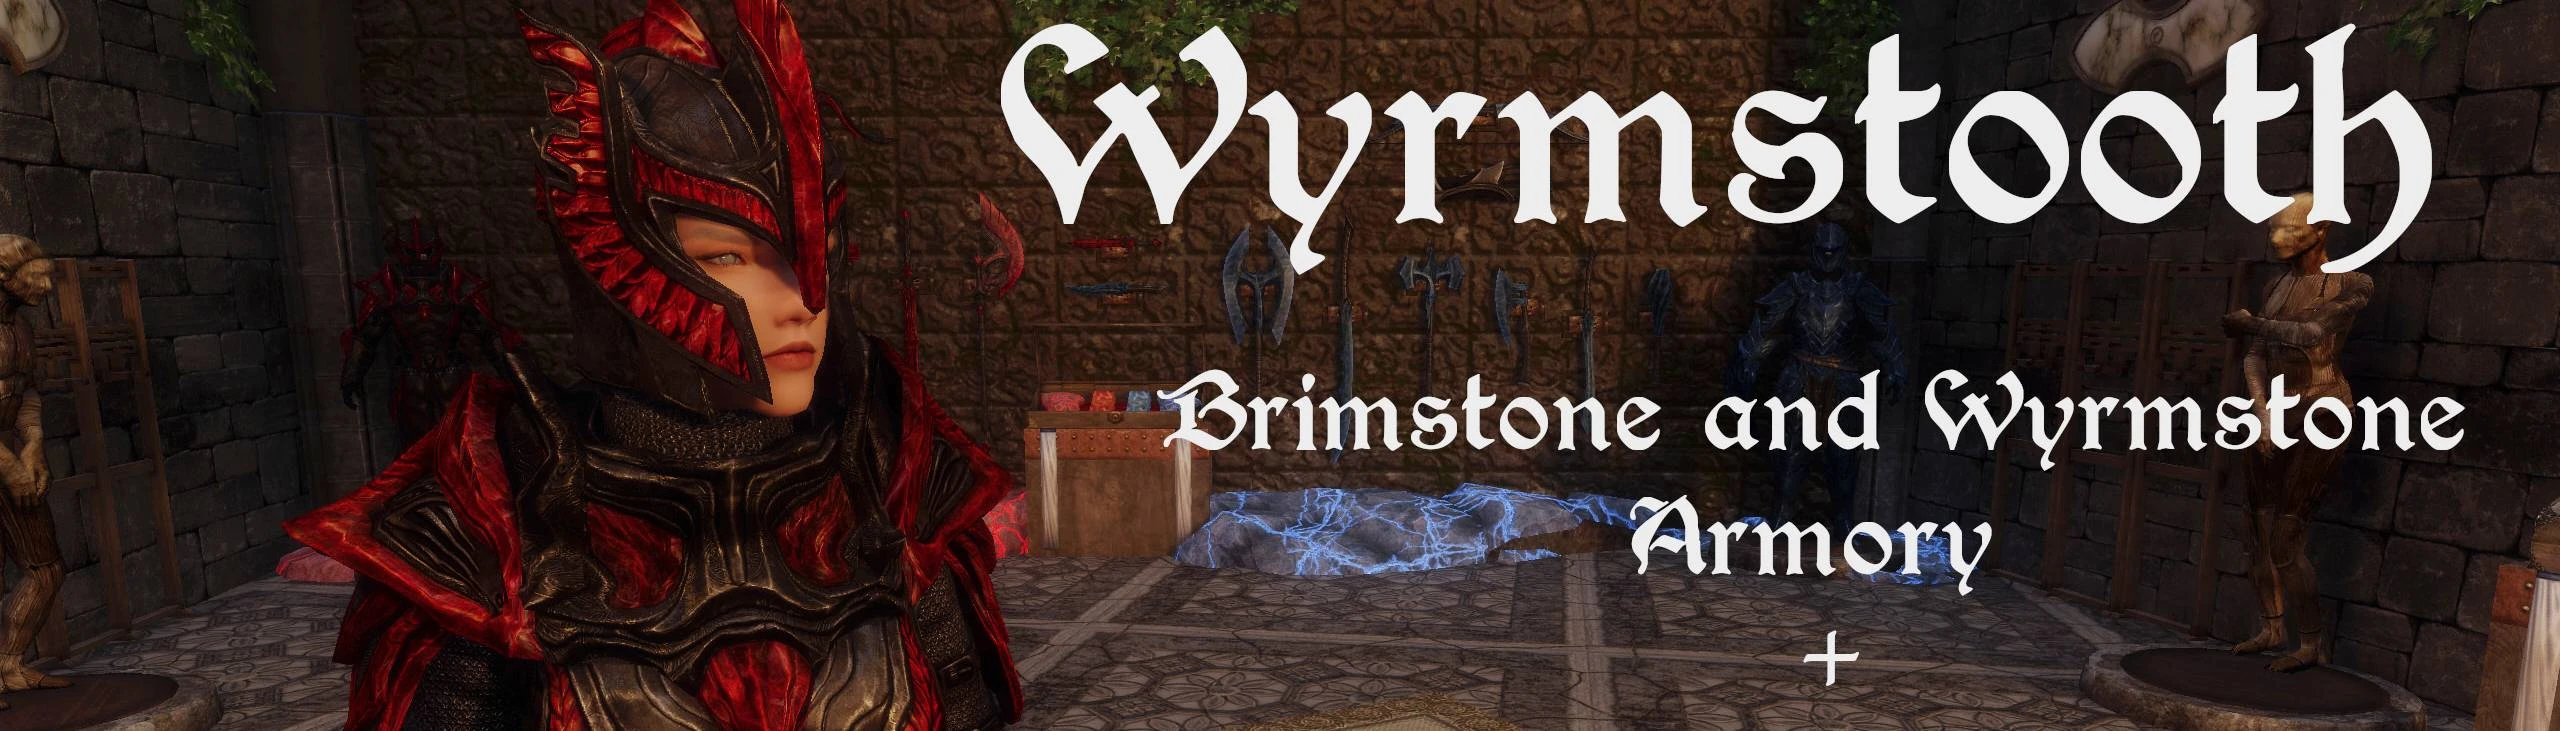 Wyrmstooth at Skyrim Special Edition Nexus - Mods and Community